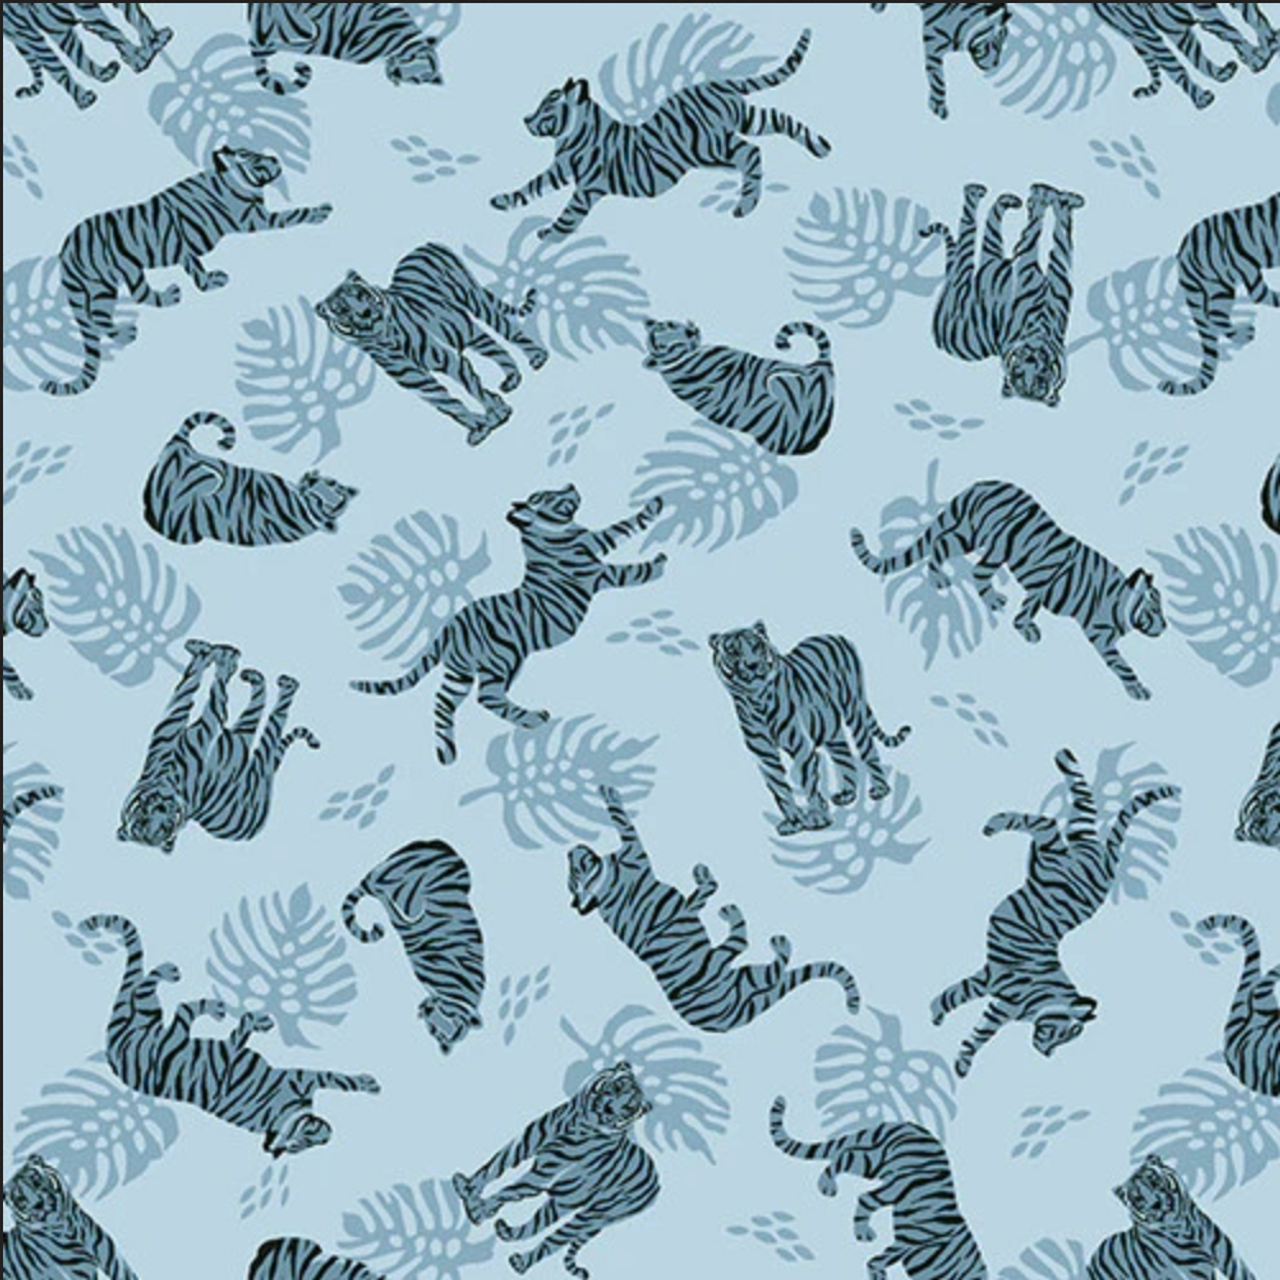 Studio E Earth Day Every Day Tossed Tigers Lt Blue Cotton Fabric By The Yard